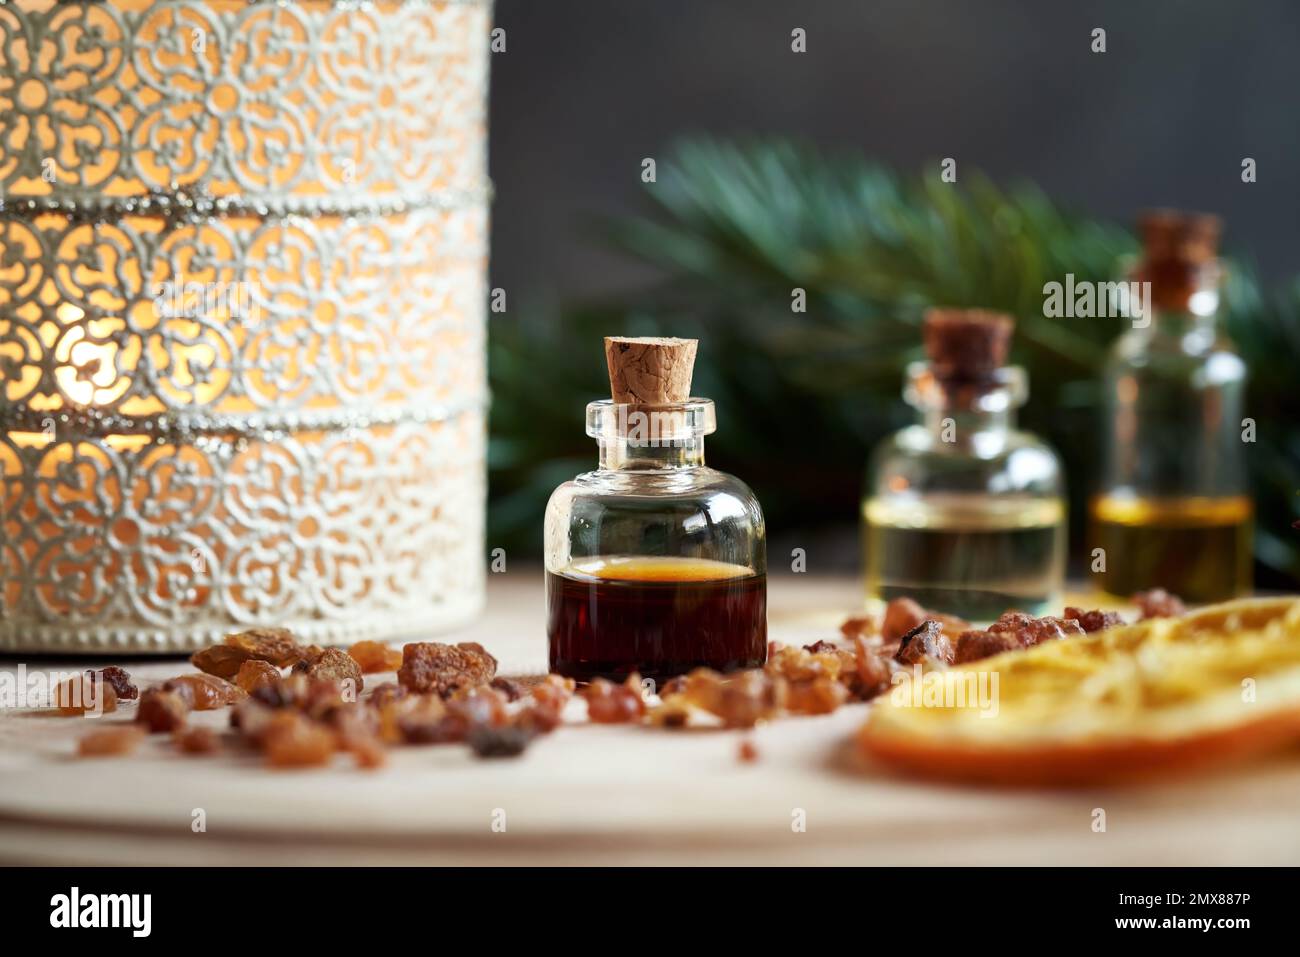 A bottle of myrrh essential oil with a candle and fir branches Stock Photo